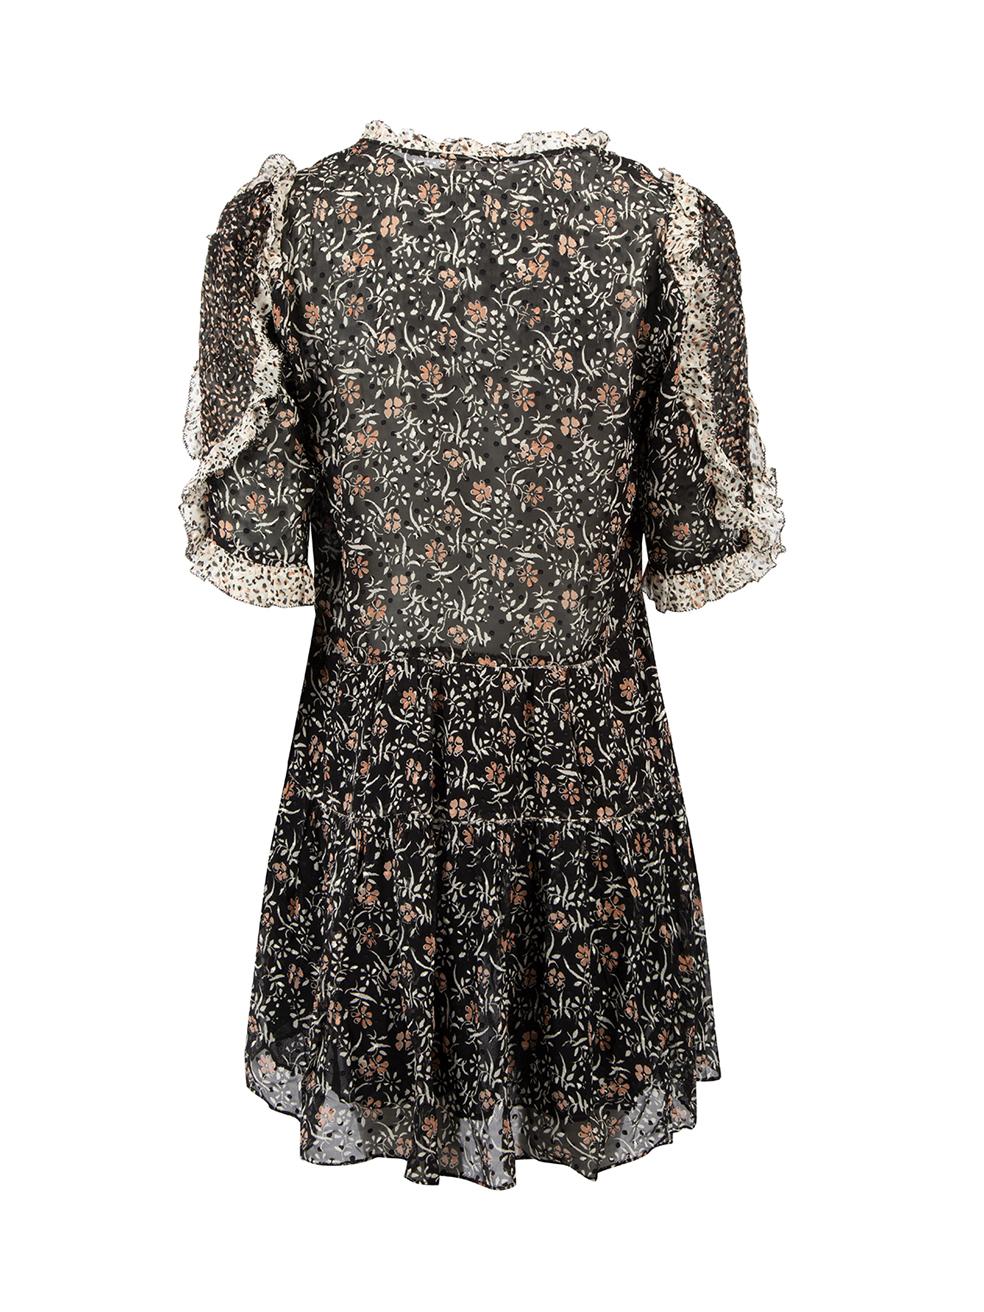 Ulla Johnson Black Floral Print Mini Dress Size XS In Excellent Condition For Sale In London, GB